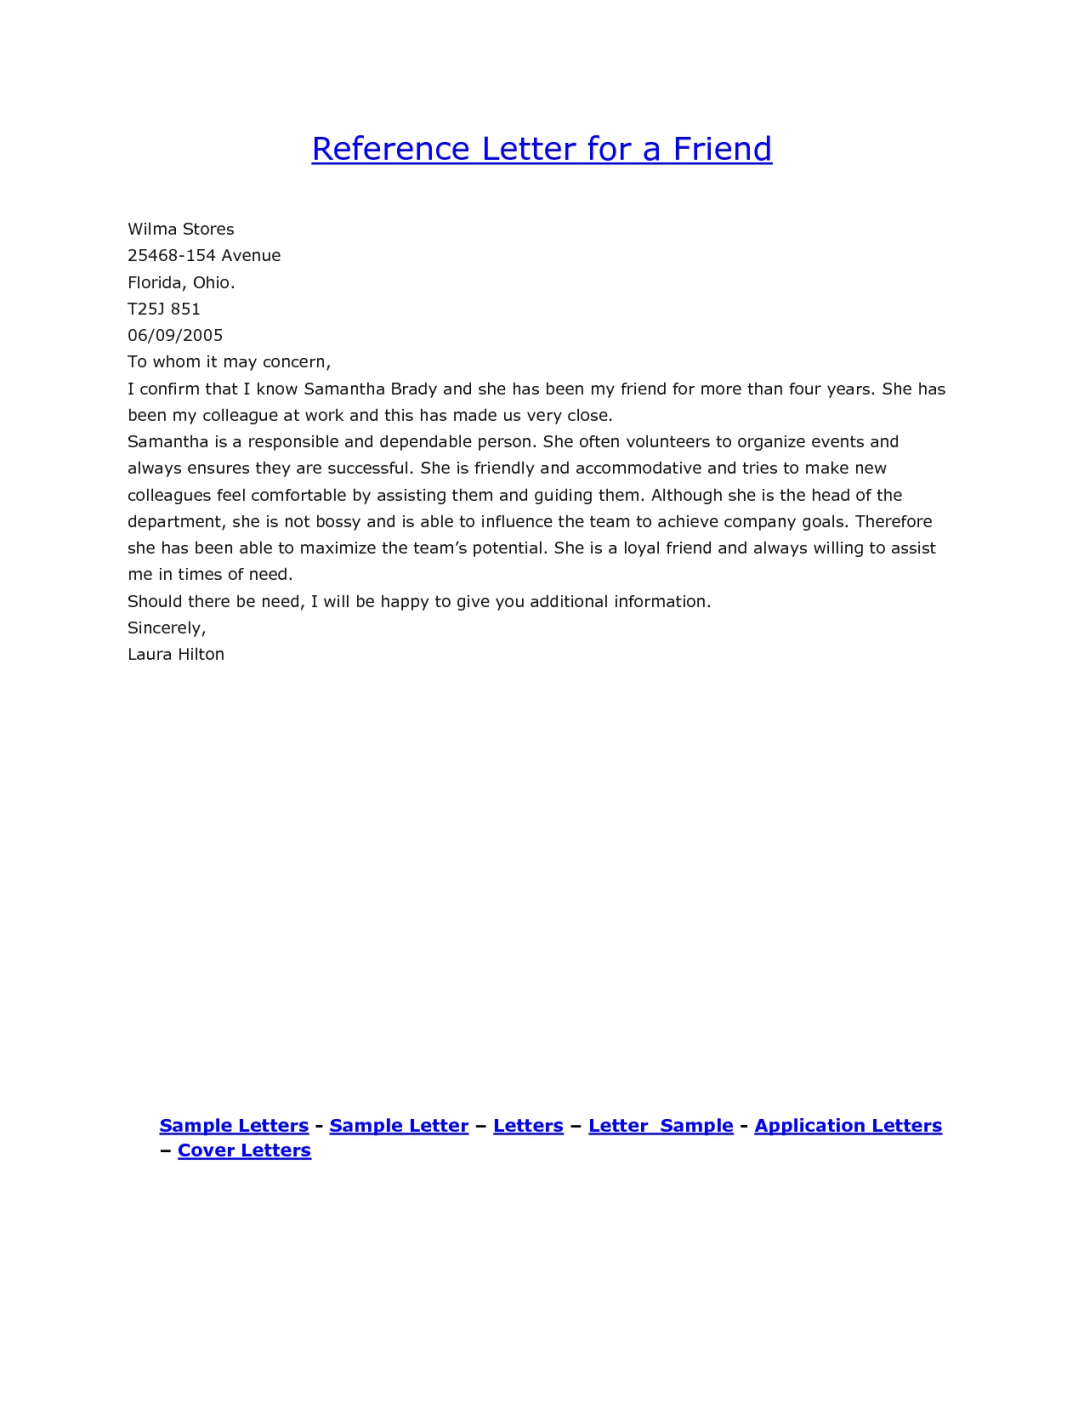 Reference Letter Sample For A Friend - Yahoo Search Results